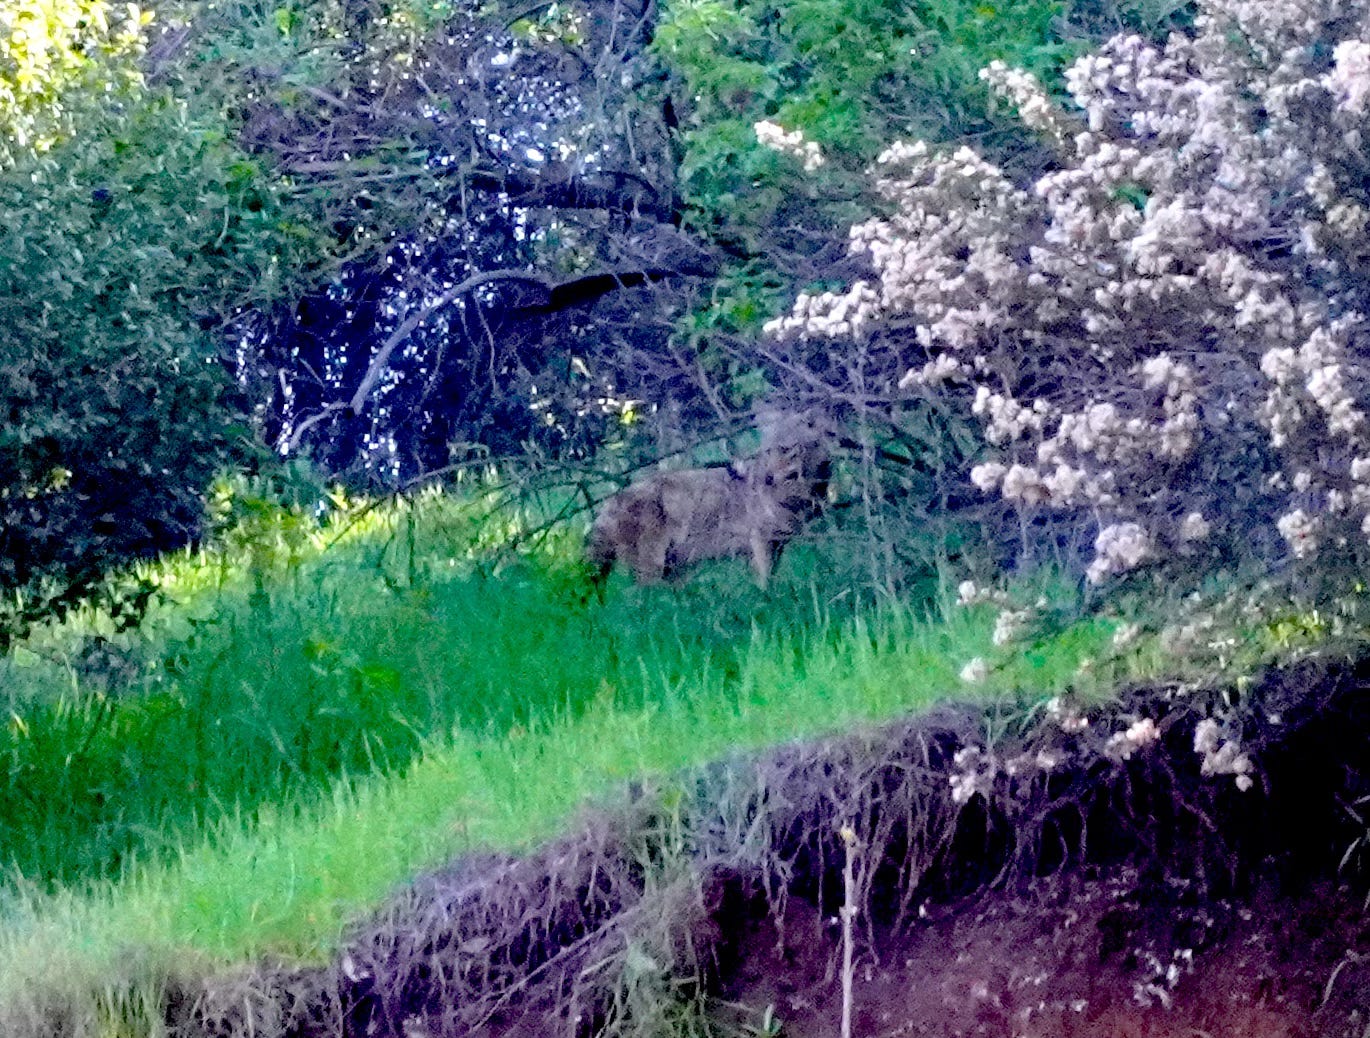 A grey and brown coyote looking over its shoulder, tucked behind a cherry blossom tree in a grassy knoll.